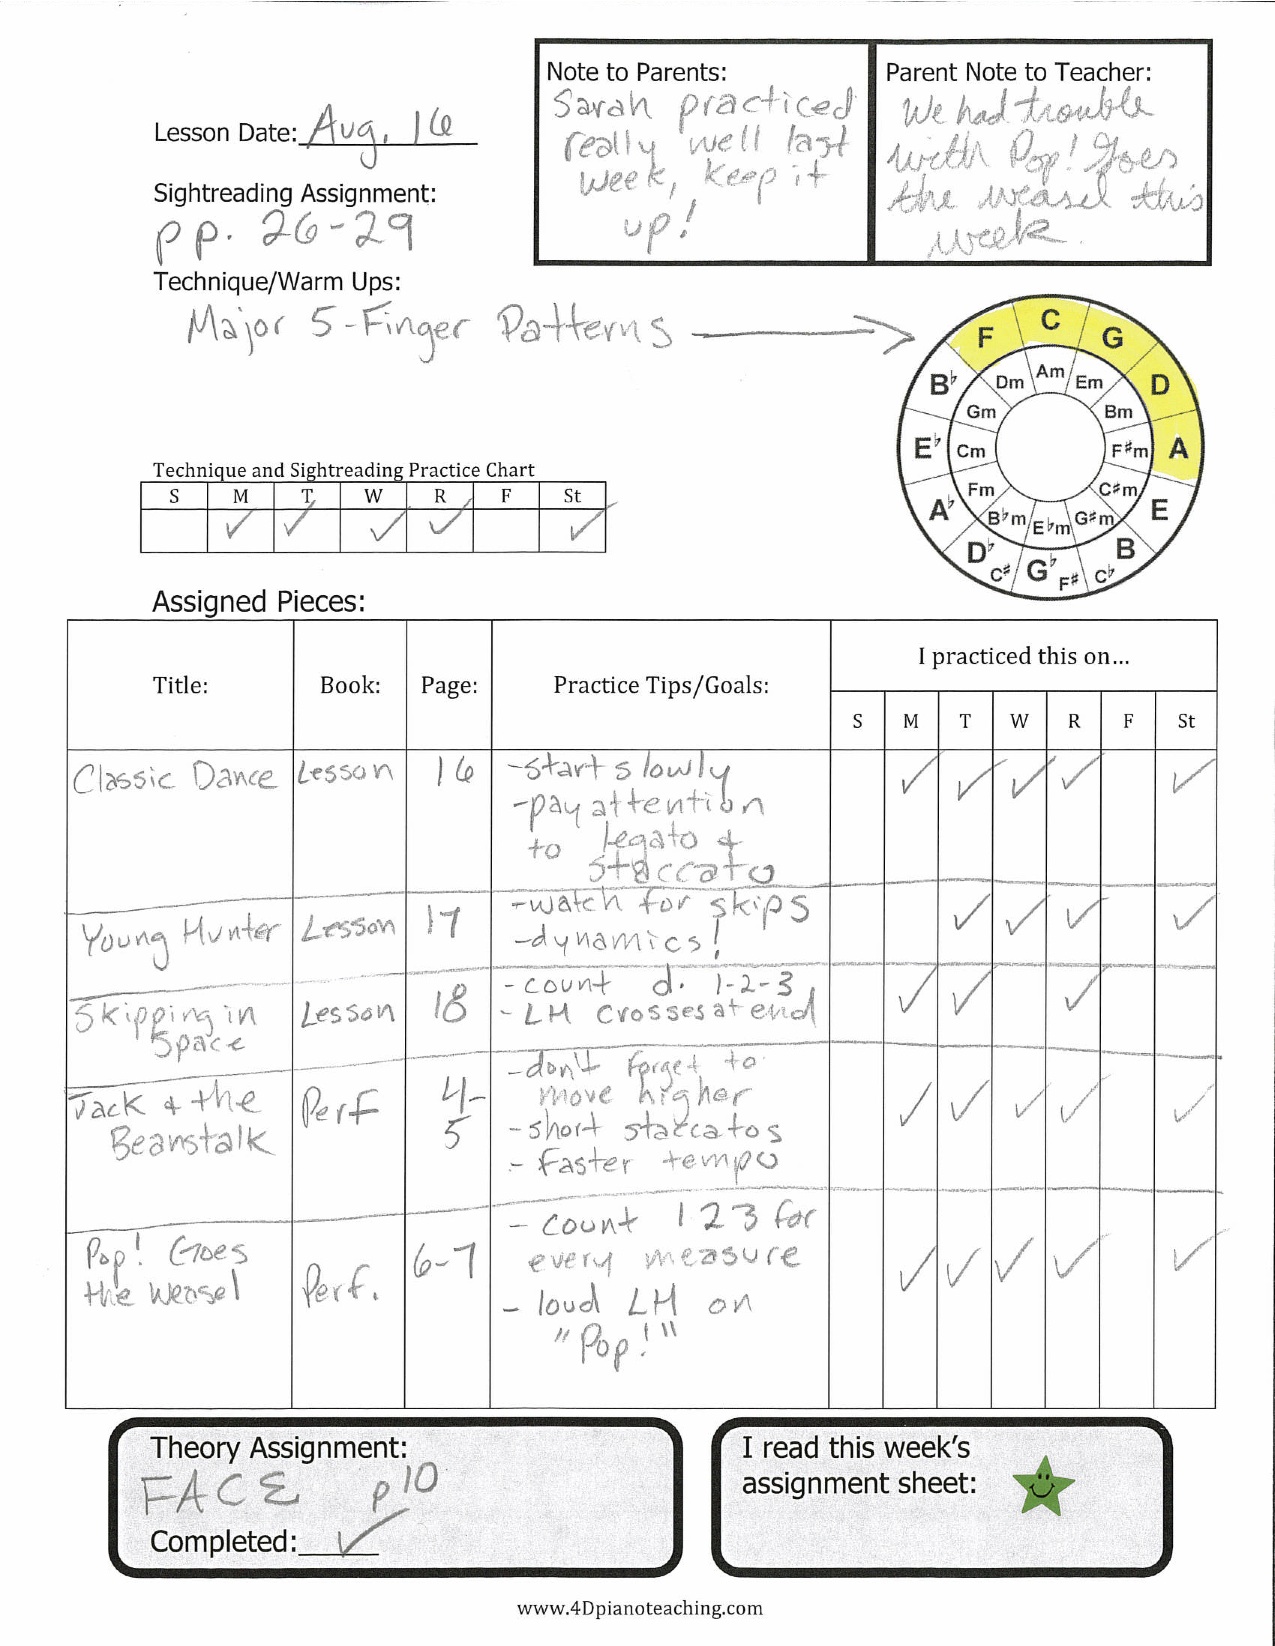 Assignment Sheet Template For Students from 4dpianoteaching.com